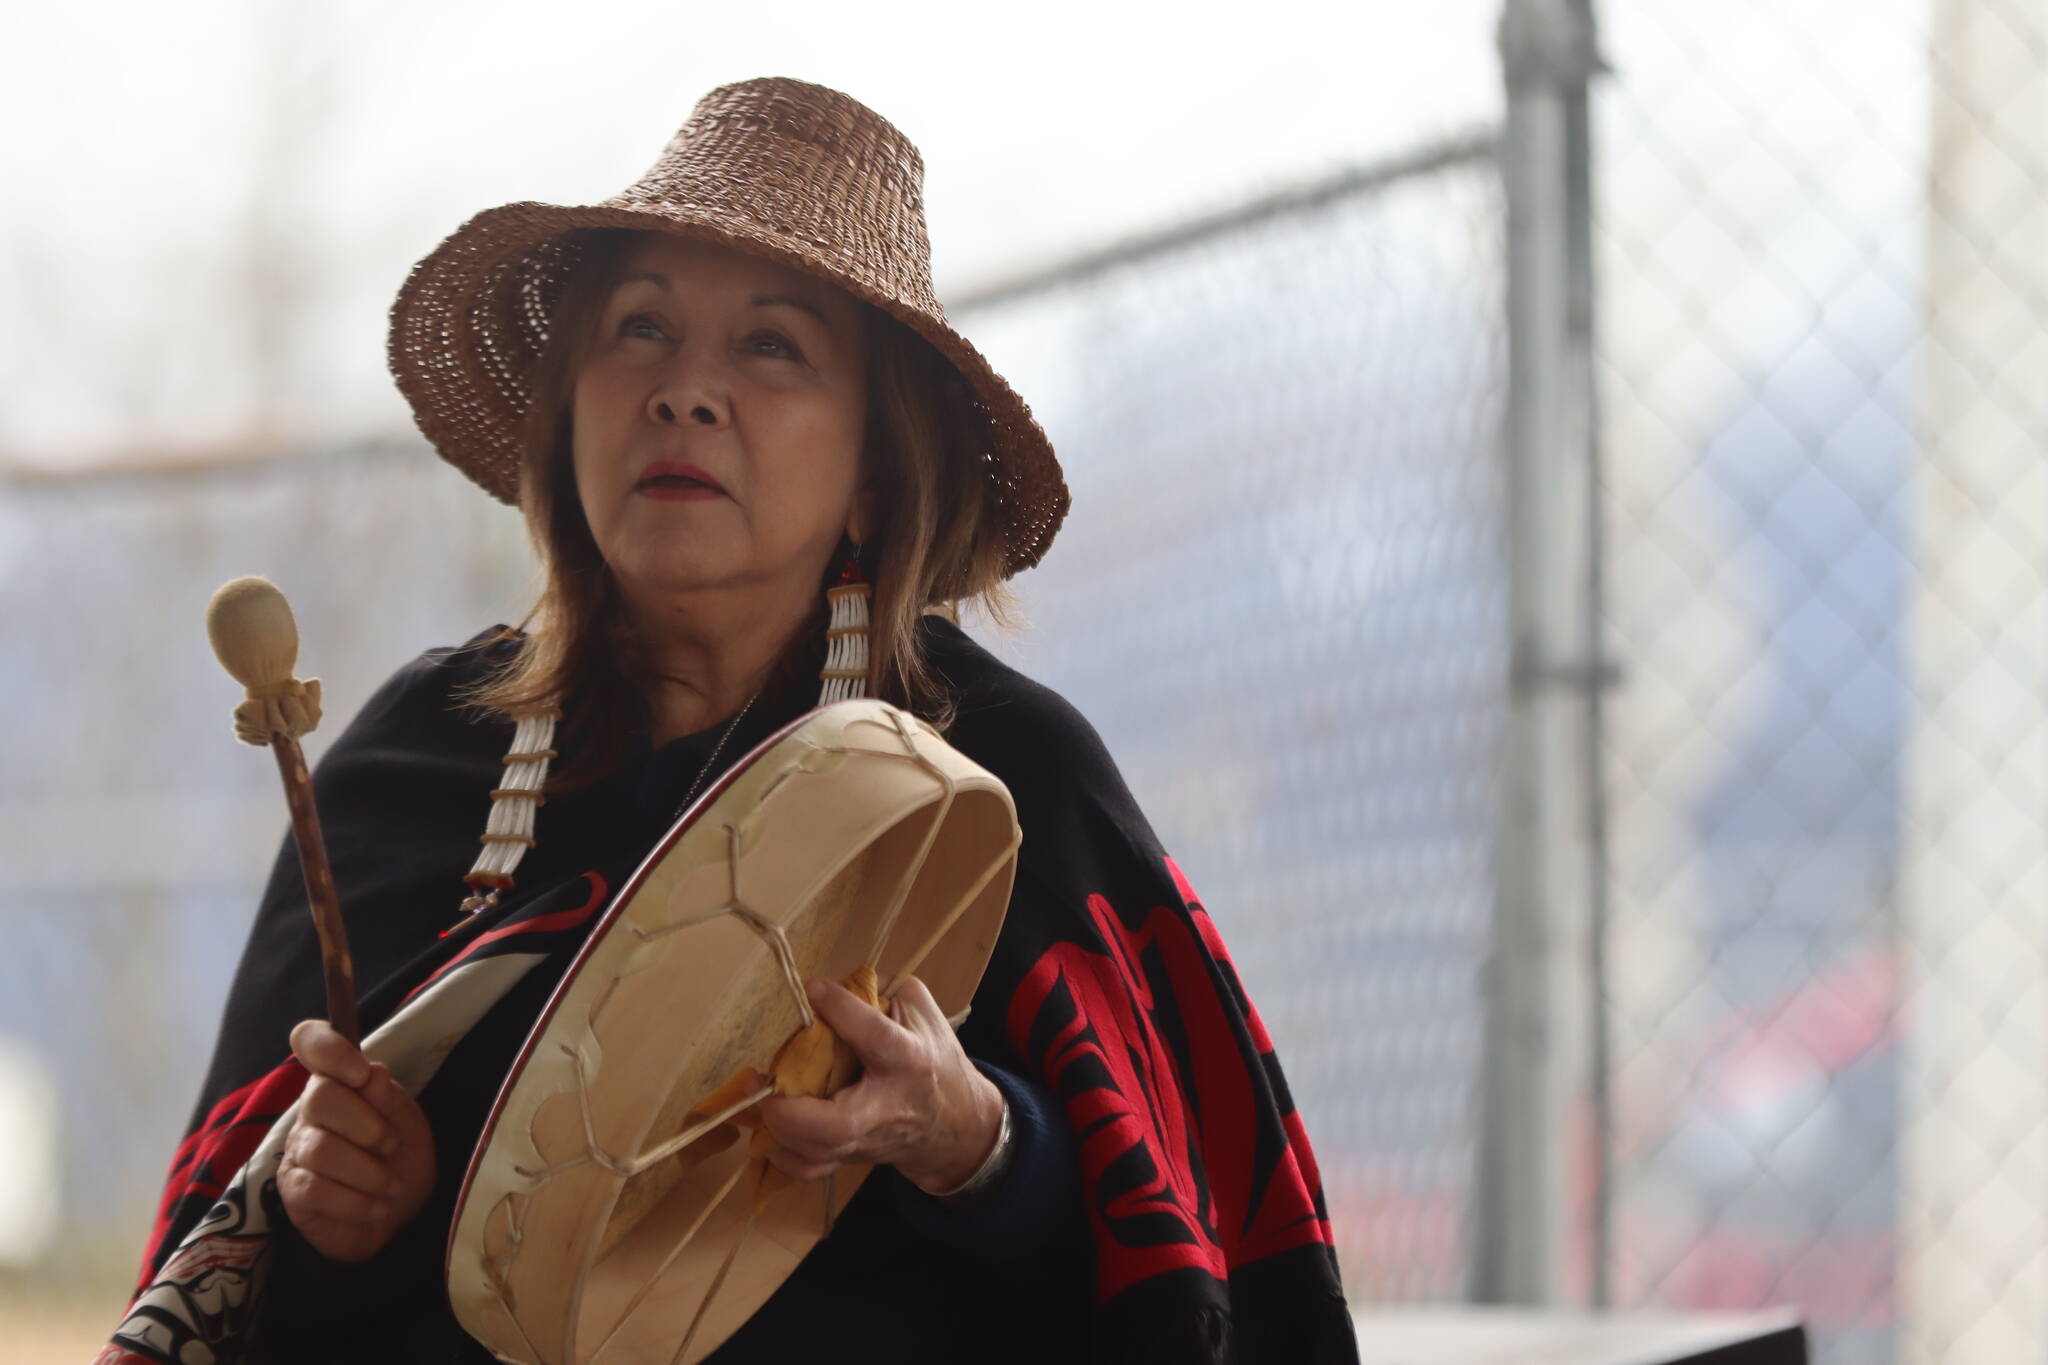 Nancy Barnes of the Chugach Villages leads people gathered at Marine Park on Friday through songs and prayers as part of the blessing ceremony for the Kootéeyaa Deiyí (Totem Pole Trail) that will run along the downtown Juneau waterfront. (Jonson Kuhn / Juneau Empire)